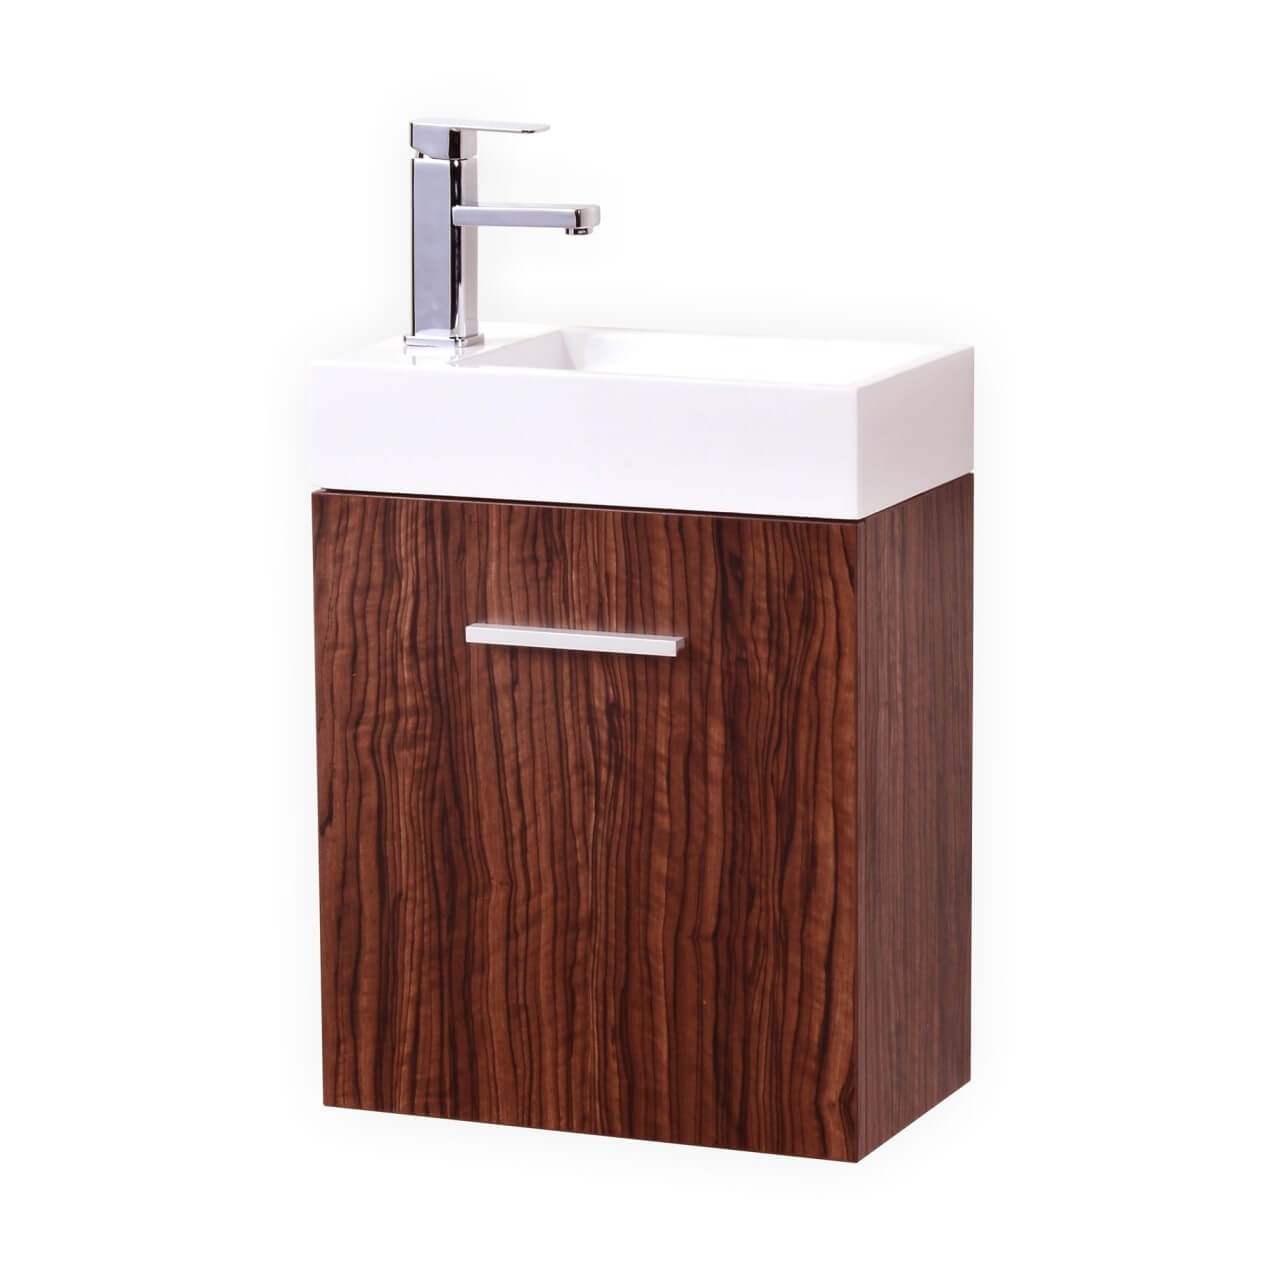 KUBEBATH Bliss BSL18-WNT 18" Single Wall Mount Bathroom Vanity in Walnut with White Acrylic Composite, Integrated Sink, Angled View